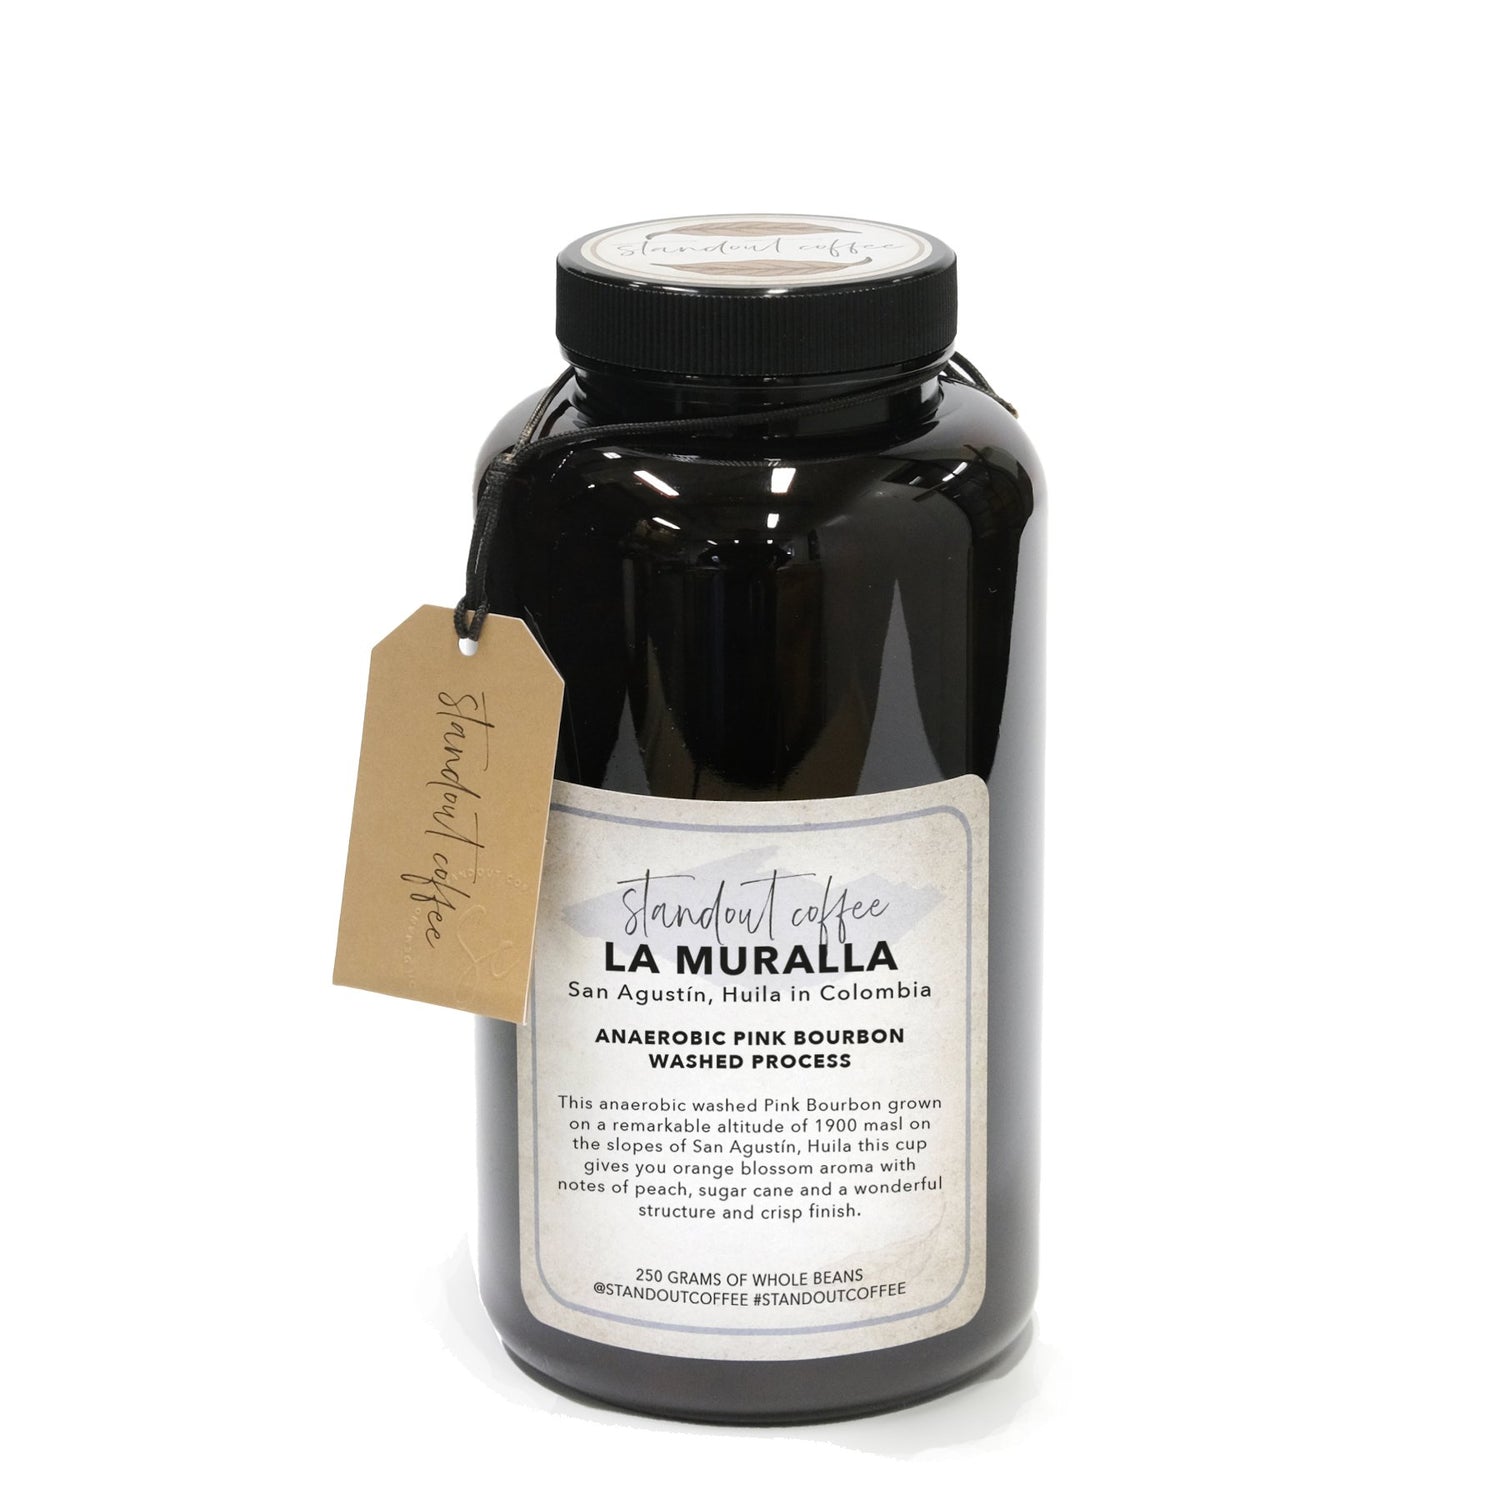 Colombia La Muralla Anaerobic Washed Pink Bourbon - Standout Coffee